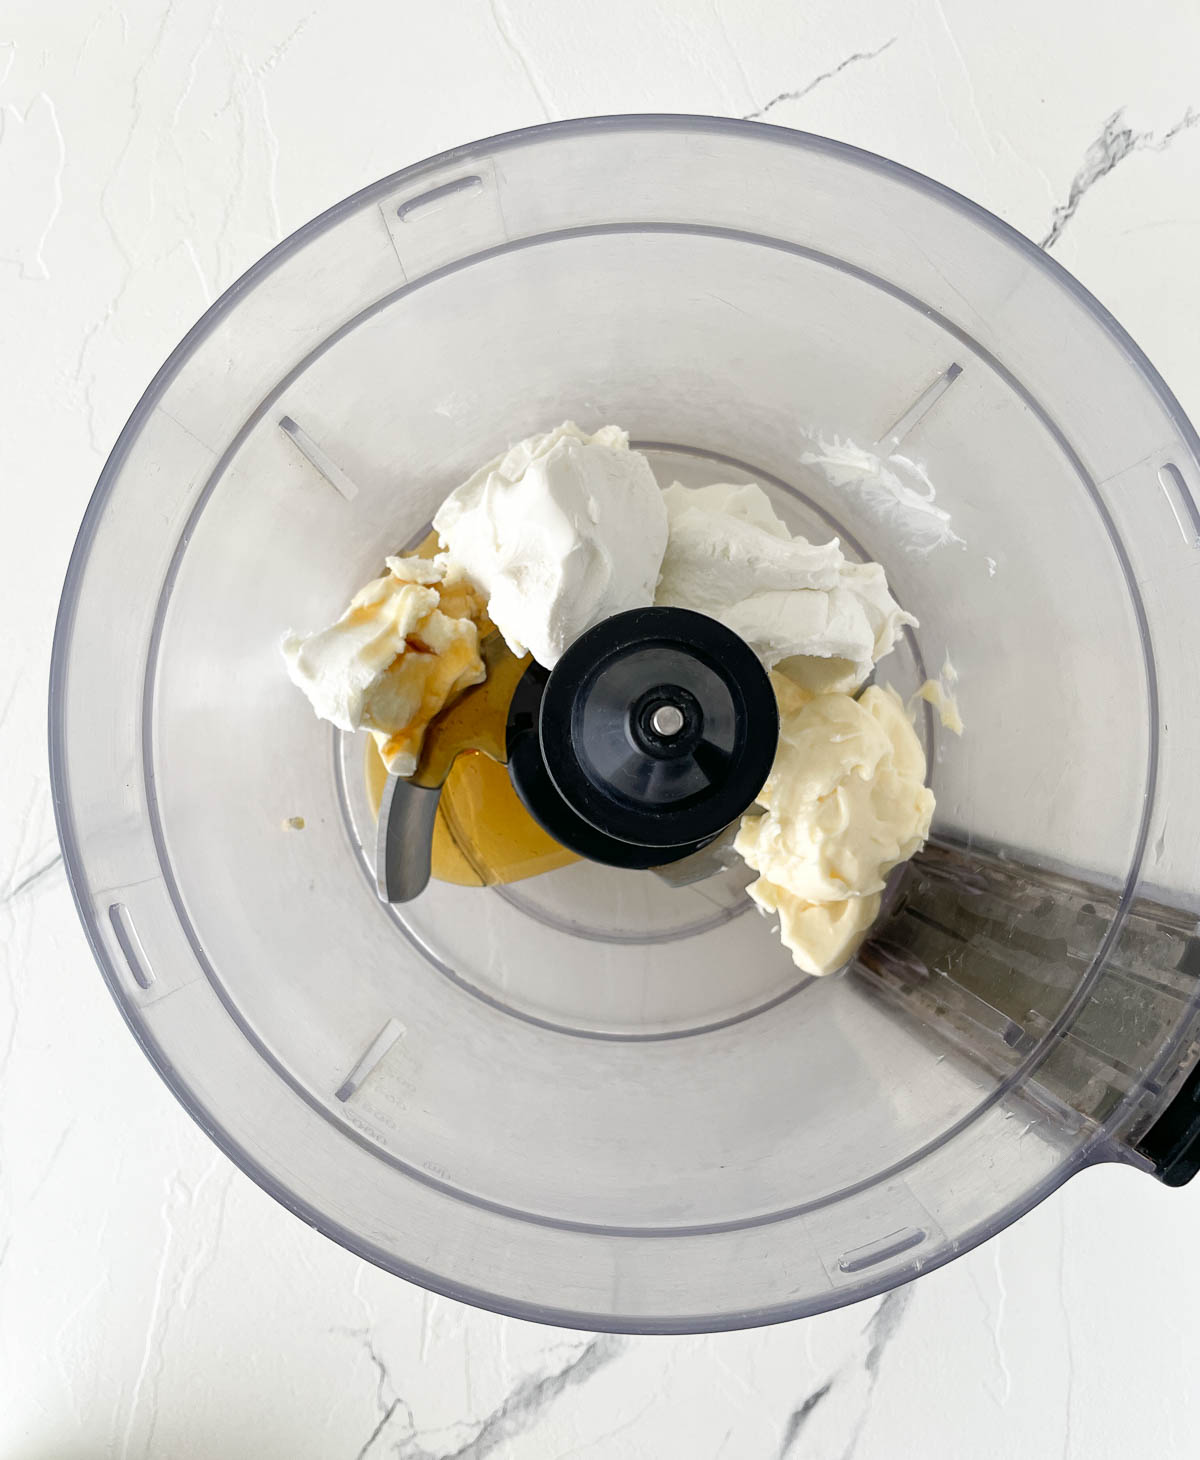 Goat cheese, cream cheese, and honey in a food processor.